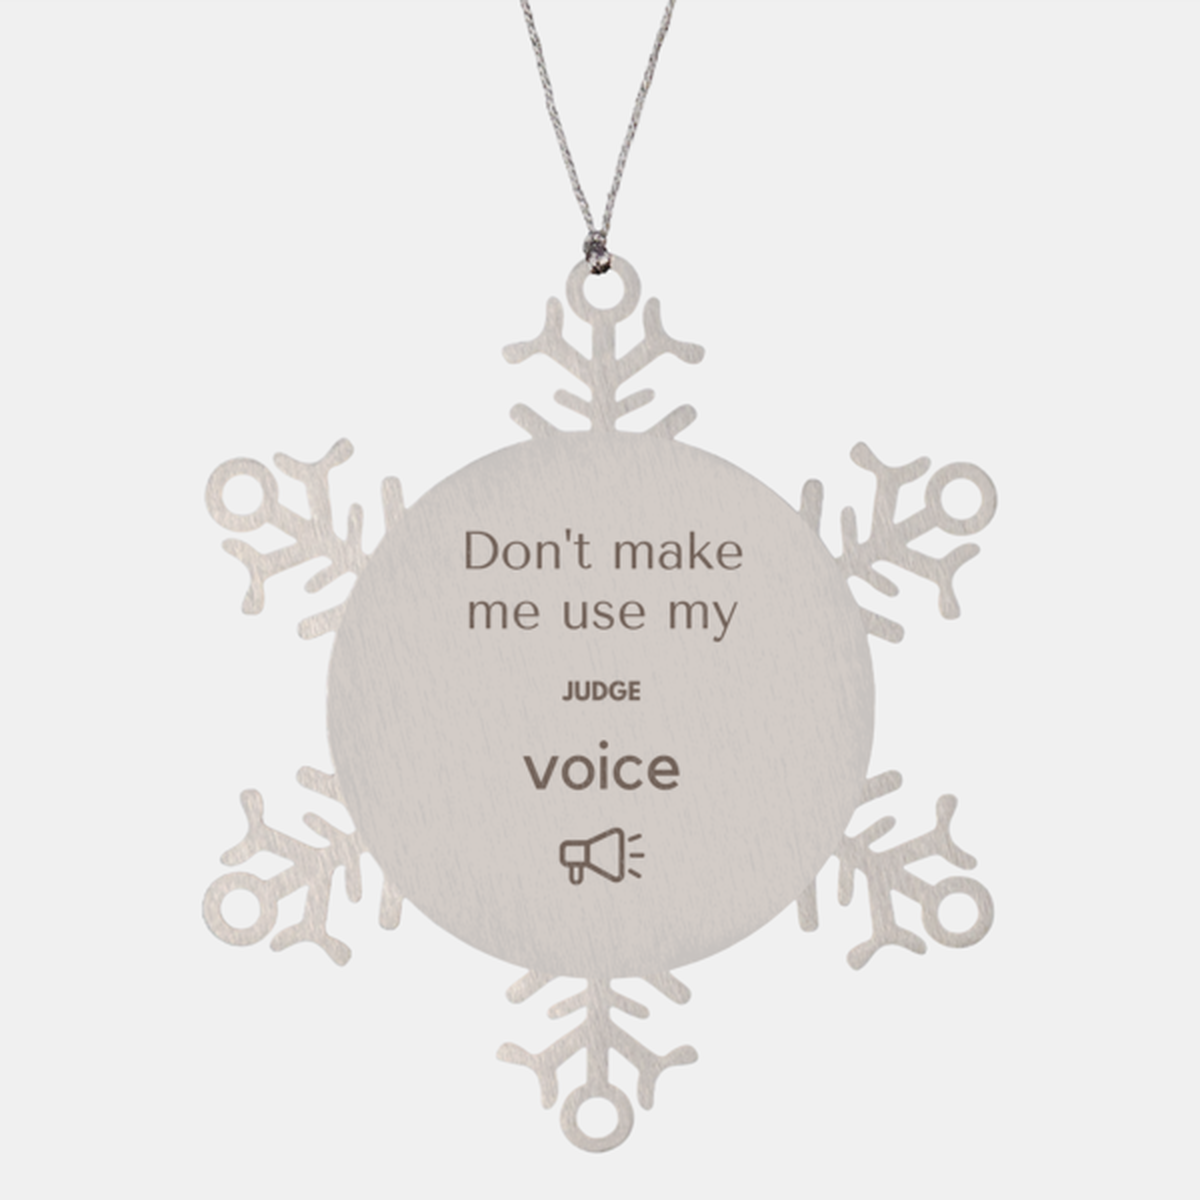 Don't make me use my Judge voice, Sarcasm Judge Ornament Gifts, Christmas Judge Snowflake Ornament Unique Gifts For Judge Coworkers, Men, Women, Colleague, Friends